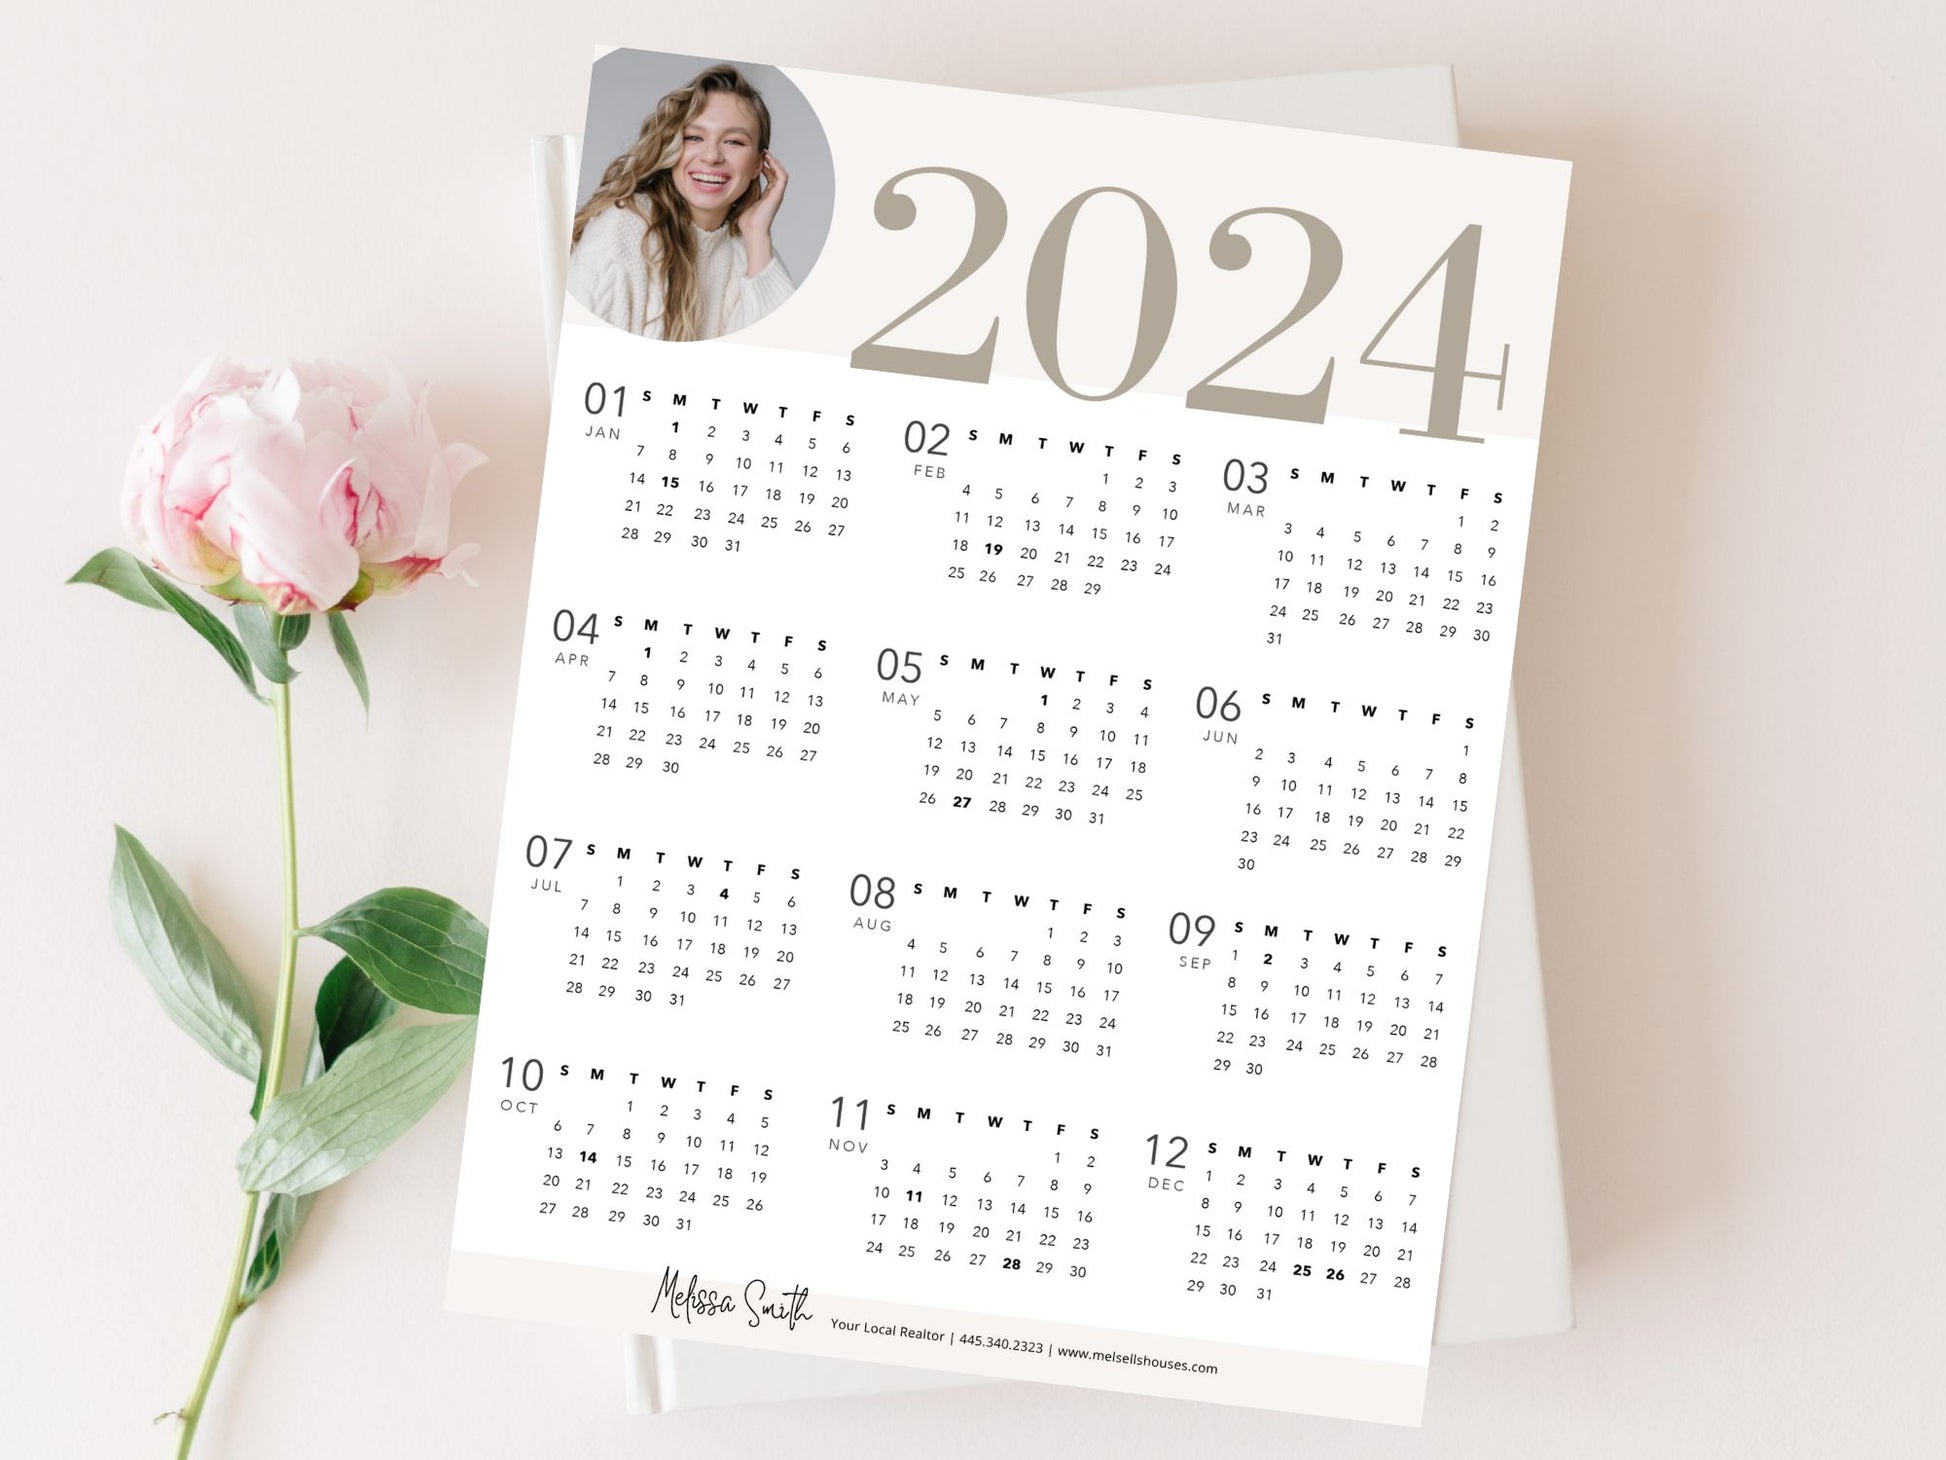 Real Estate 2024 Portrait Calendar - Professionally designed calendar offering a sleek and practical way to stay organized, promoting your real estate brand as a valuable client and colleague gift.